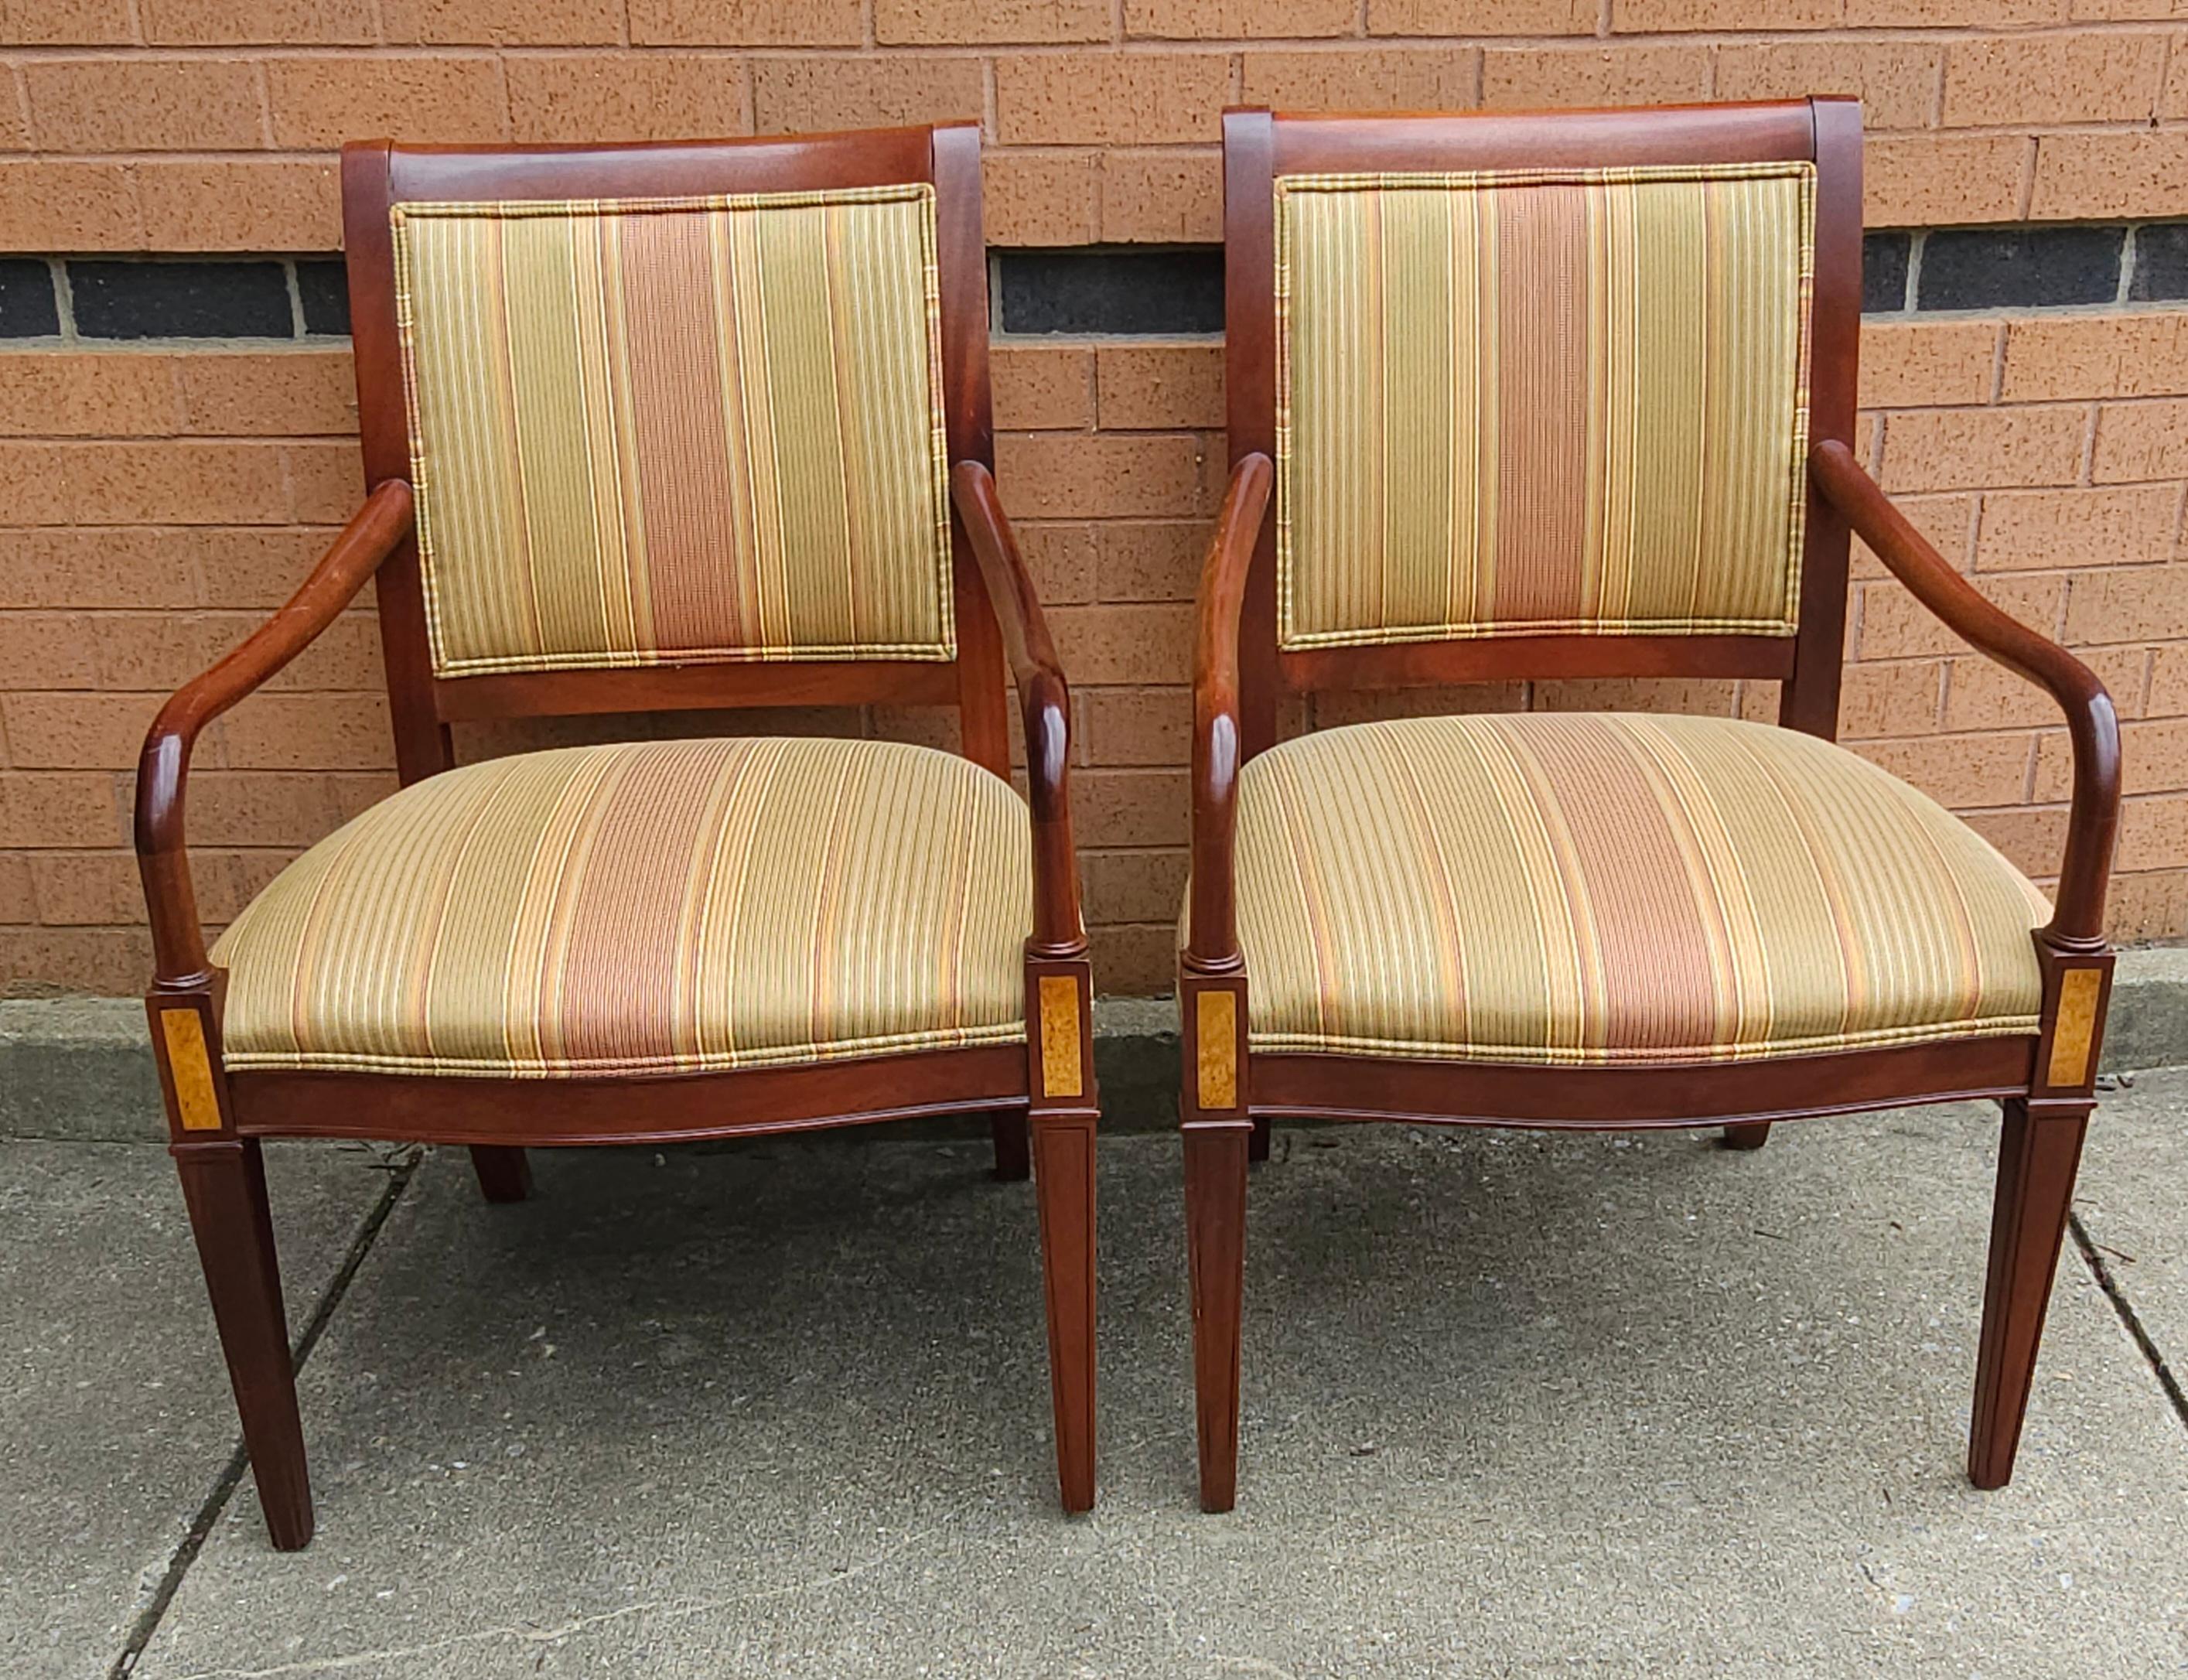 Pair of Hickory Chair Furniture Federal Style Upholstered Mahogany Armchairs in great vintage condition.
Measures 25